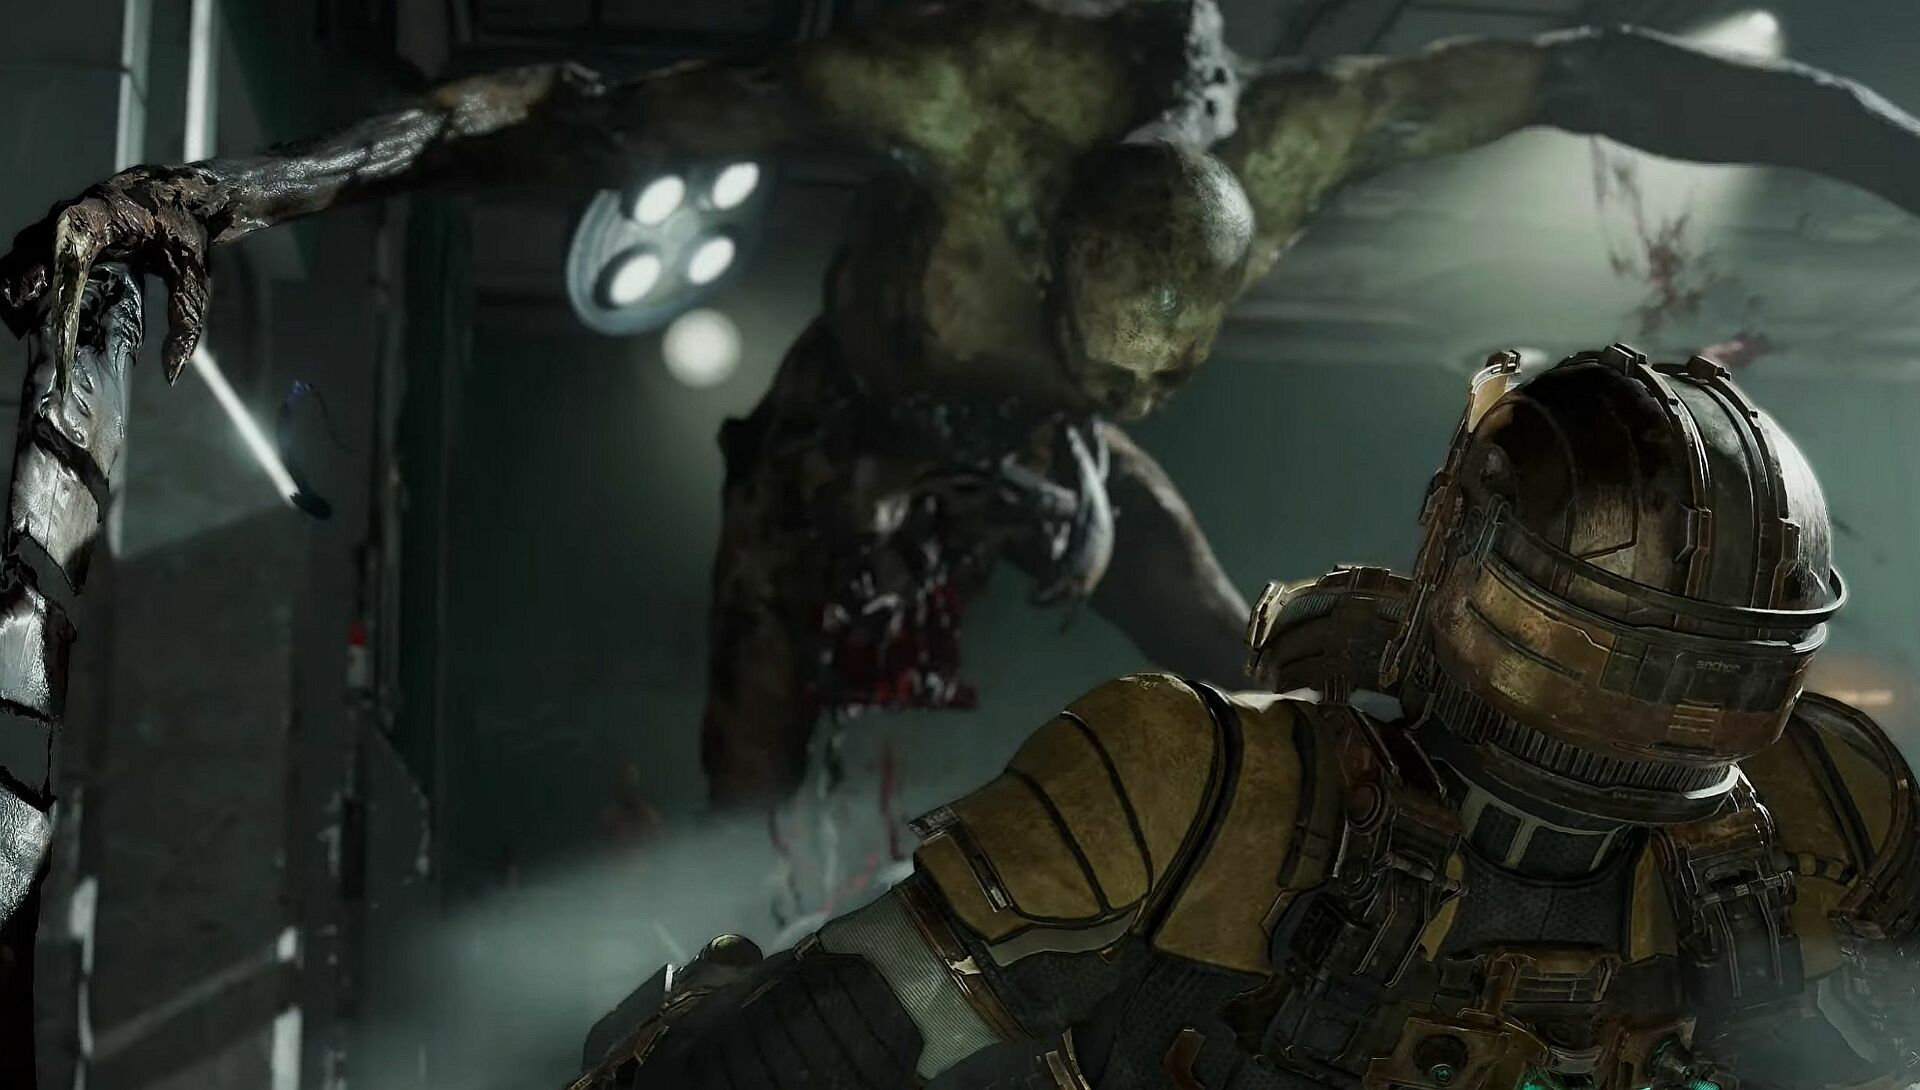 Dead Space gameplay trailer shows off the eerie, dangerous corridors within the USG Ishimura